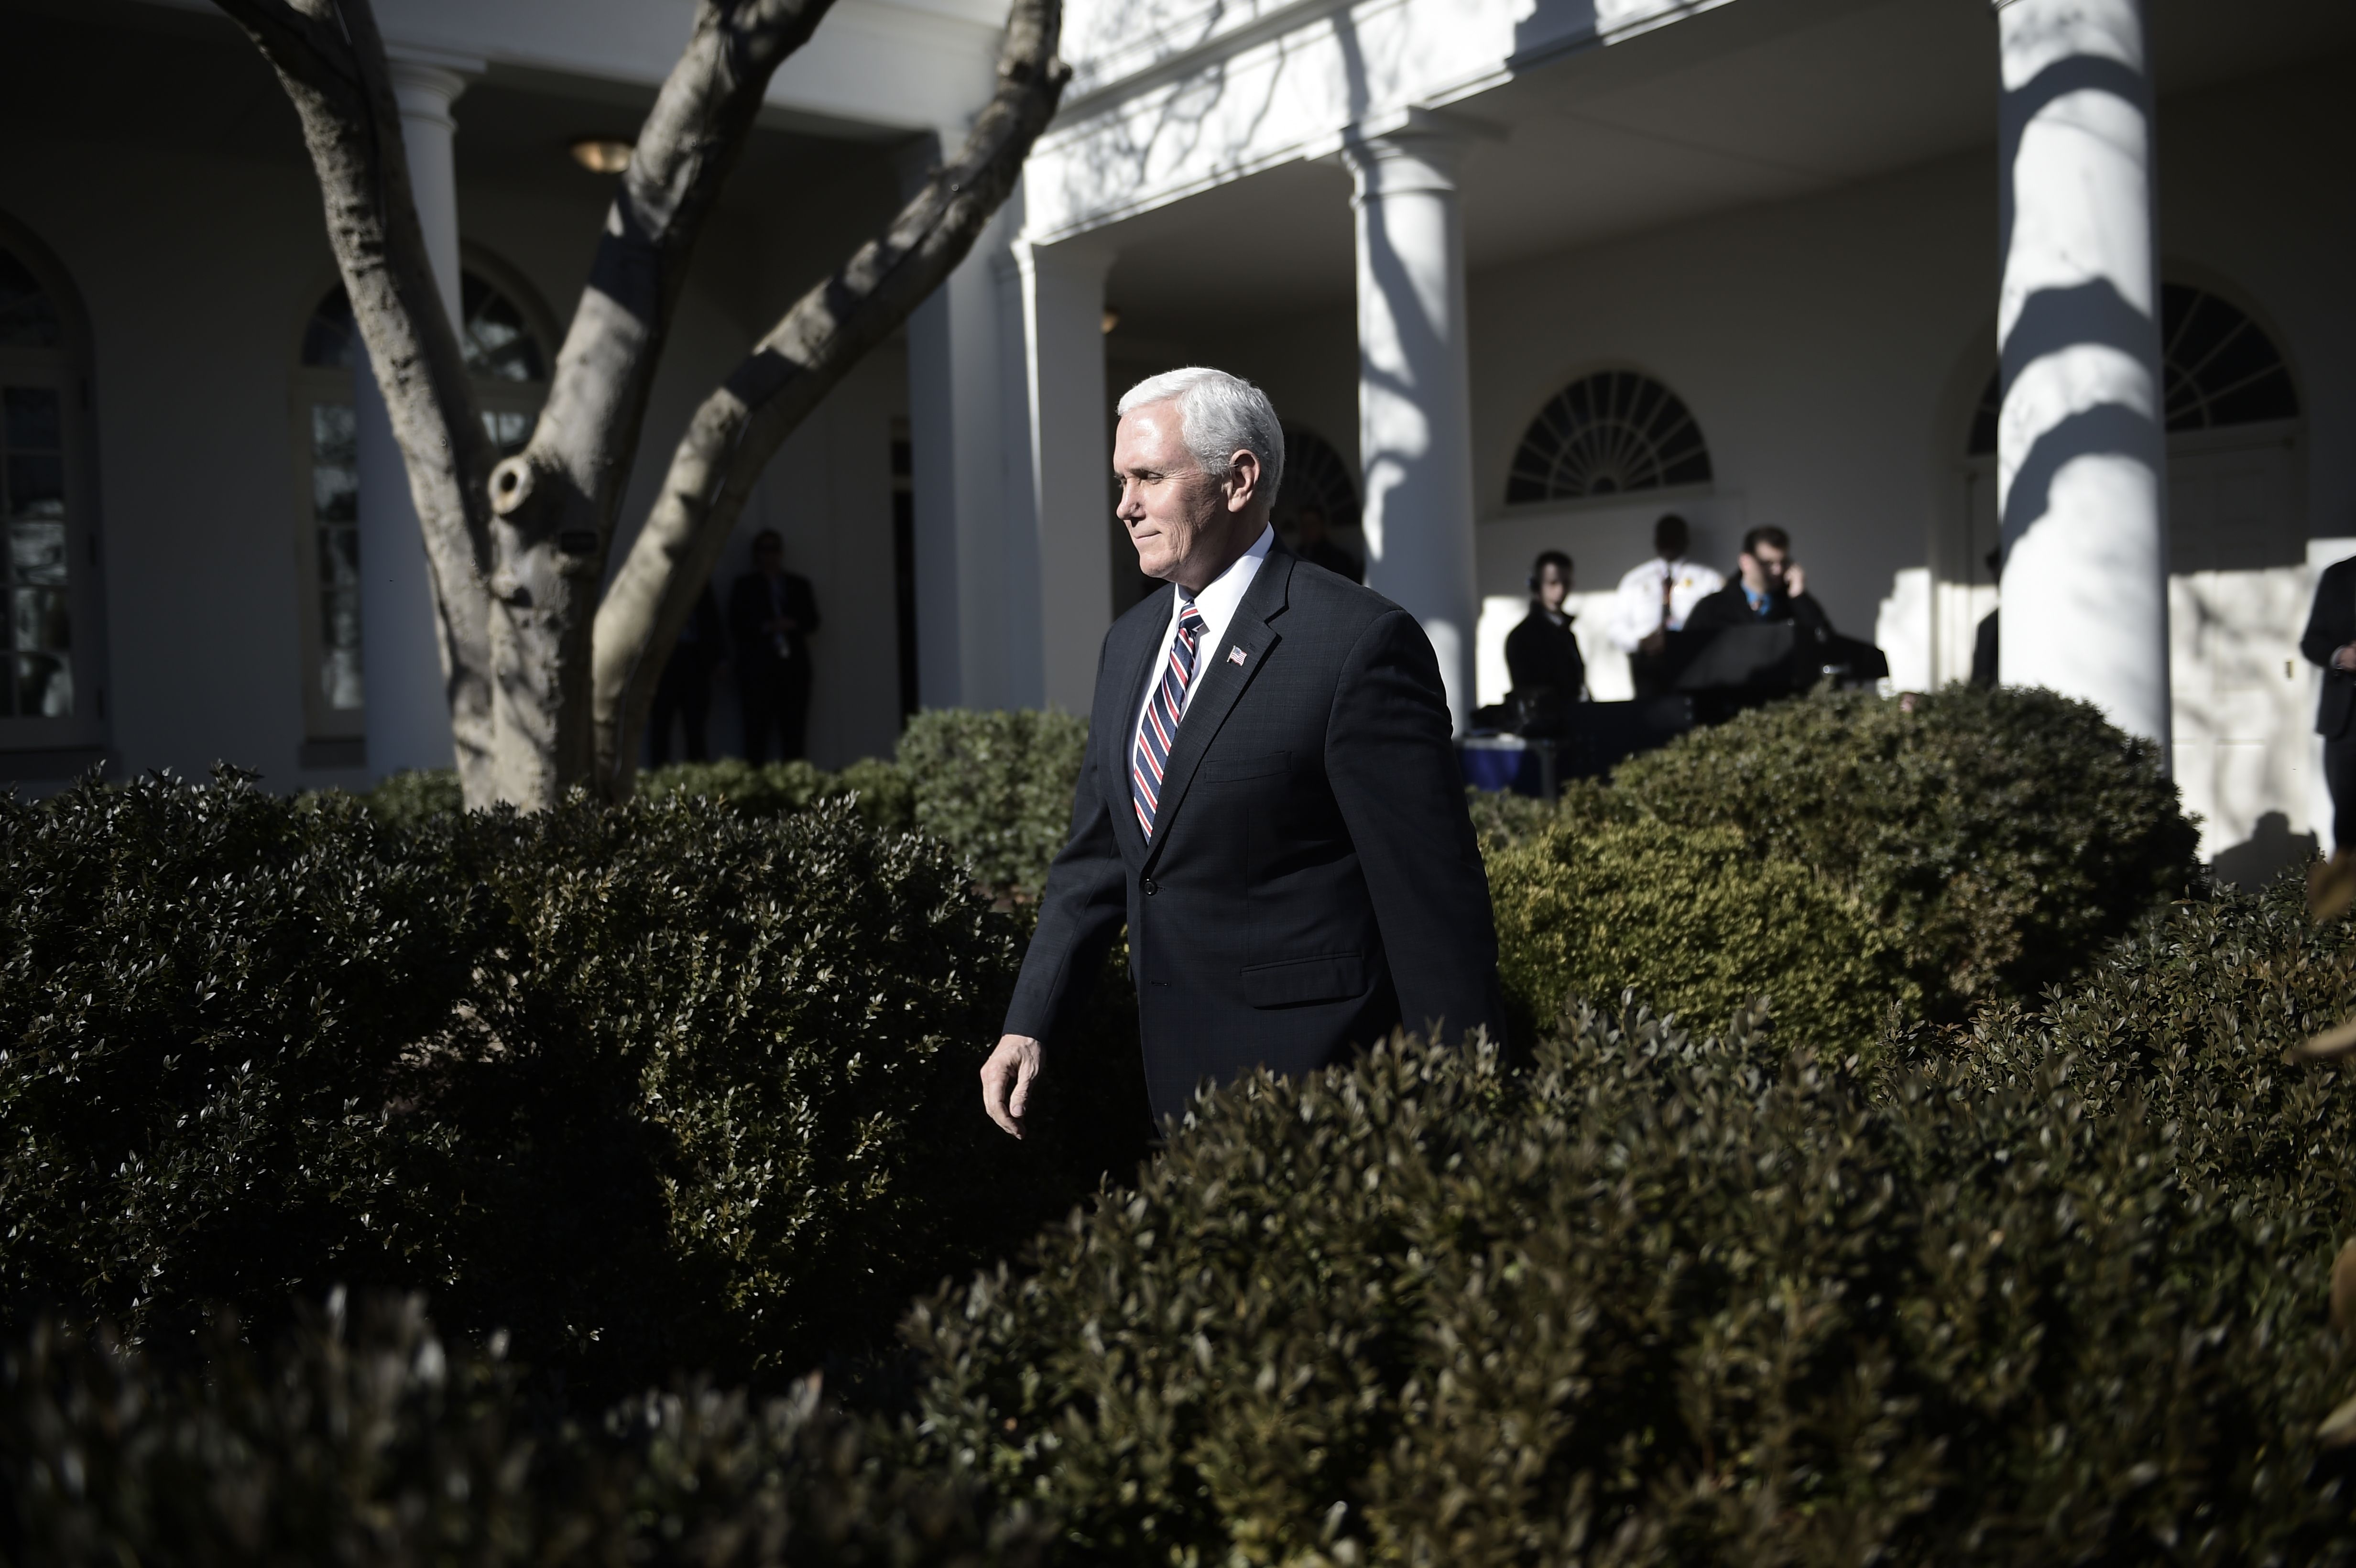 US Vice President Mike Pence arrives before US President Donald Trump speaks live via video link to the annual "March for Life" participants and anti-abortion leaders on January 19, 2018 from the White House in Washington,DC. The 45th edition of the rally, which describes itself as "the world's largest pro-life event," takes place on the National Mall -- with other scheduled speakers including House Speaker Paul Ryan. / AFP PHOTO / Brendan SMIALOWSKI (Photo credit should read BRENDAN SMIALOWSKI/AFP/Getty Images)